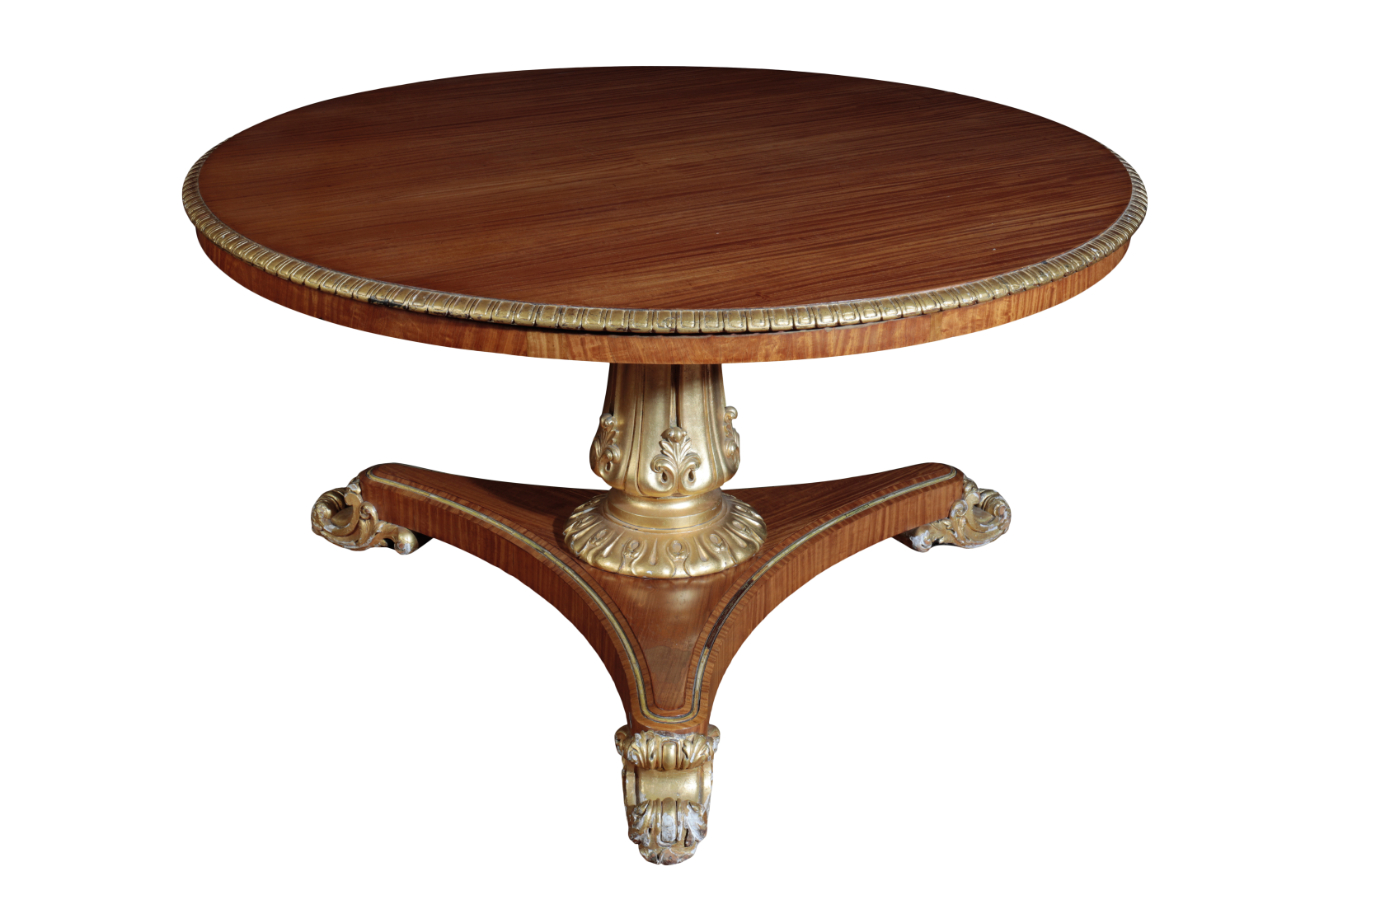 A GEORGE IV PARCEL GILT SATINWOOD CENTRE TABLE, BY WILLIAM RIDDLE,